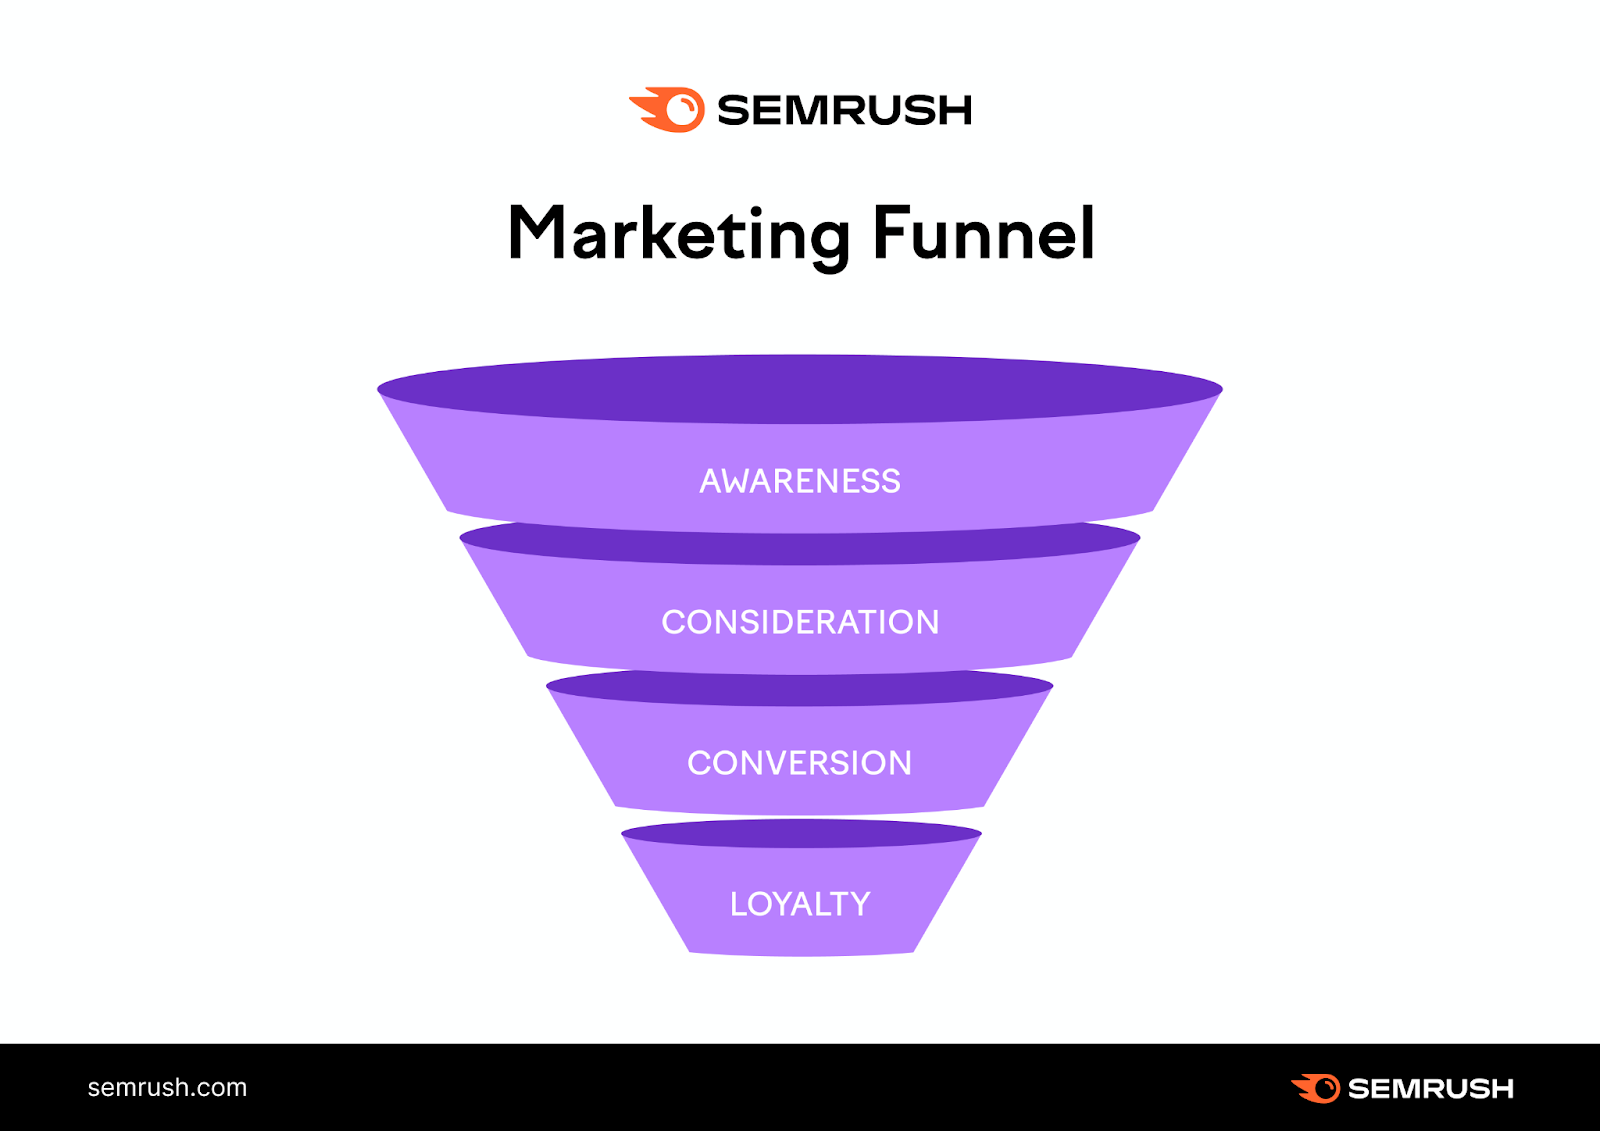 A ocular  of the selling  funnel, with awareness, consideration, conversion, and loyalty stages